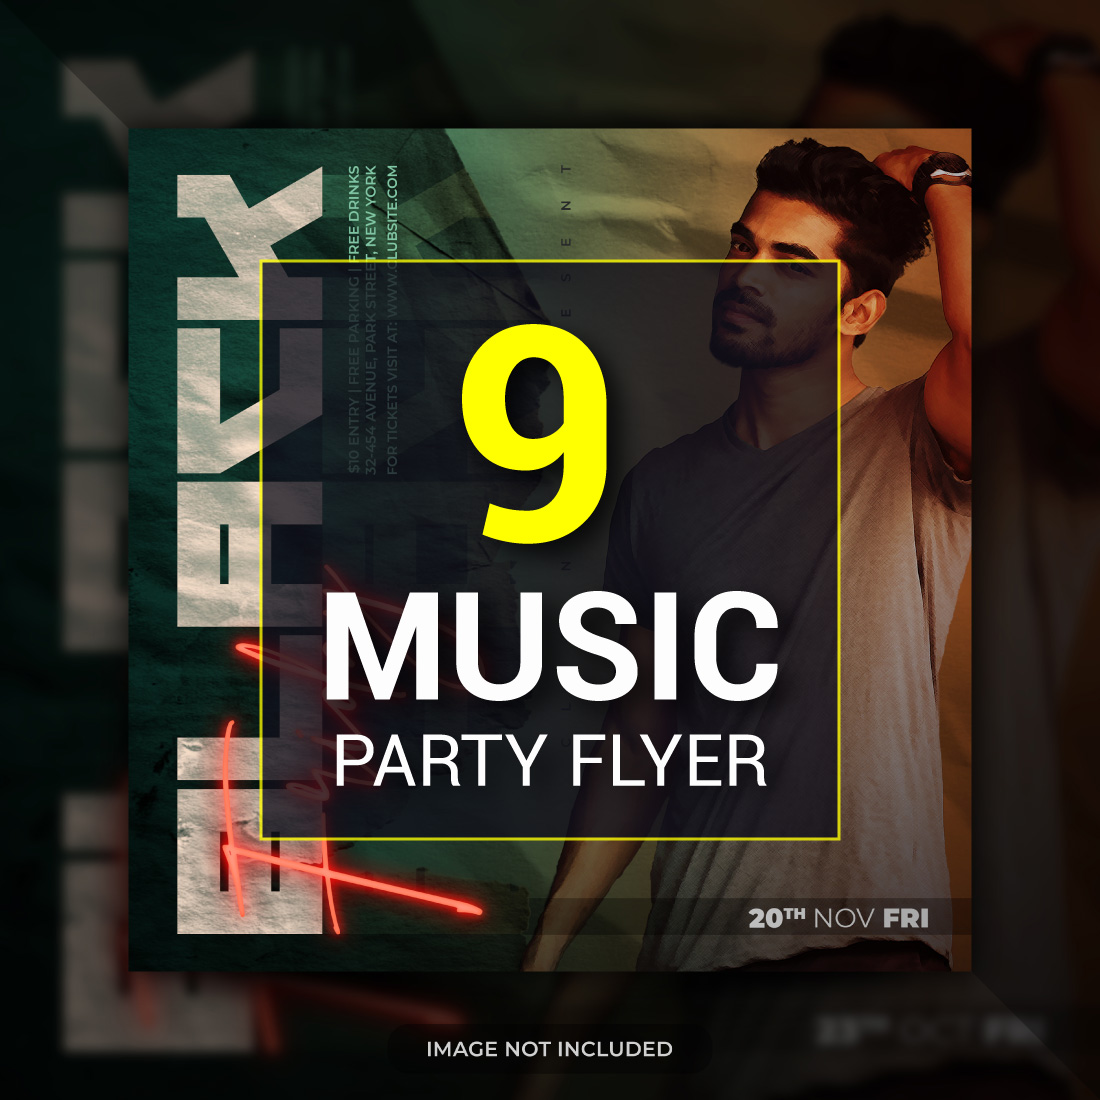 9 Music Party Flyer Template facebook image.